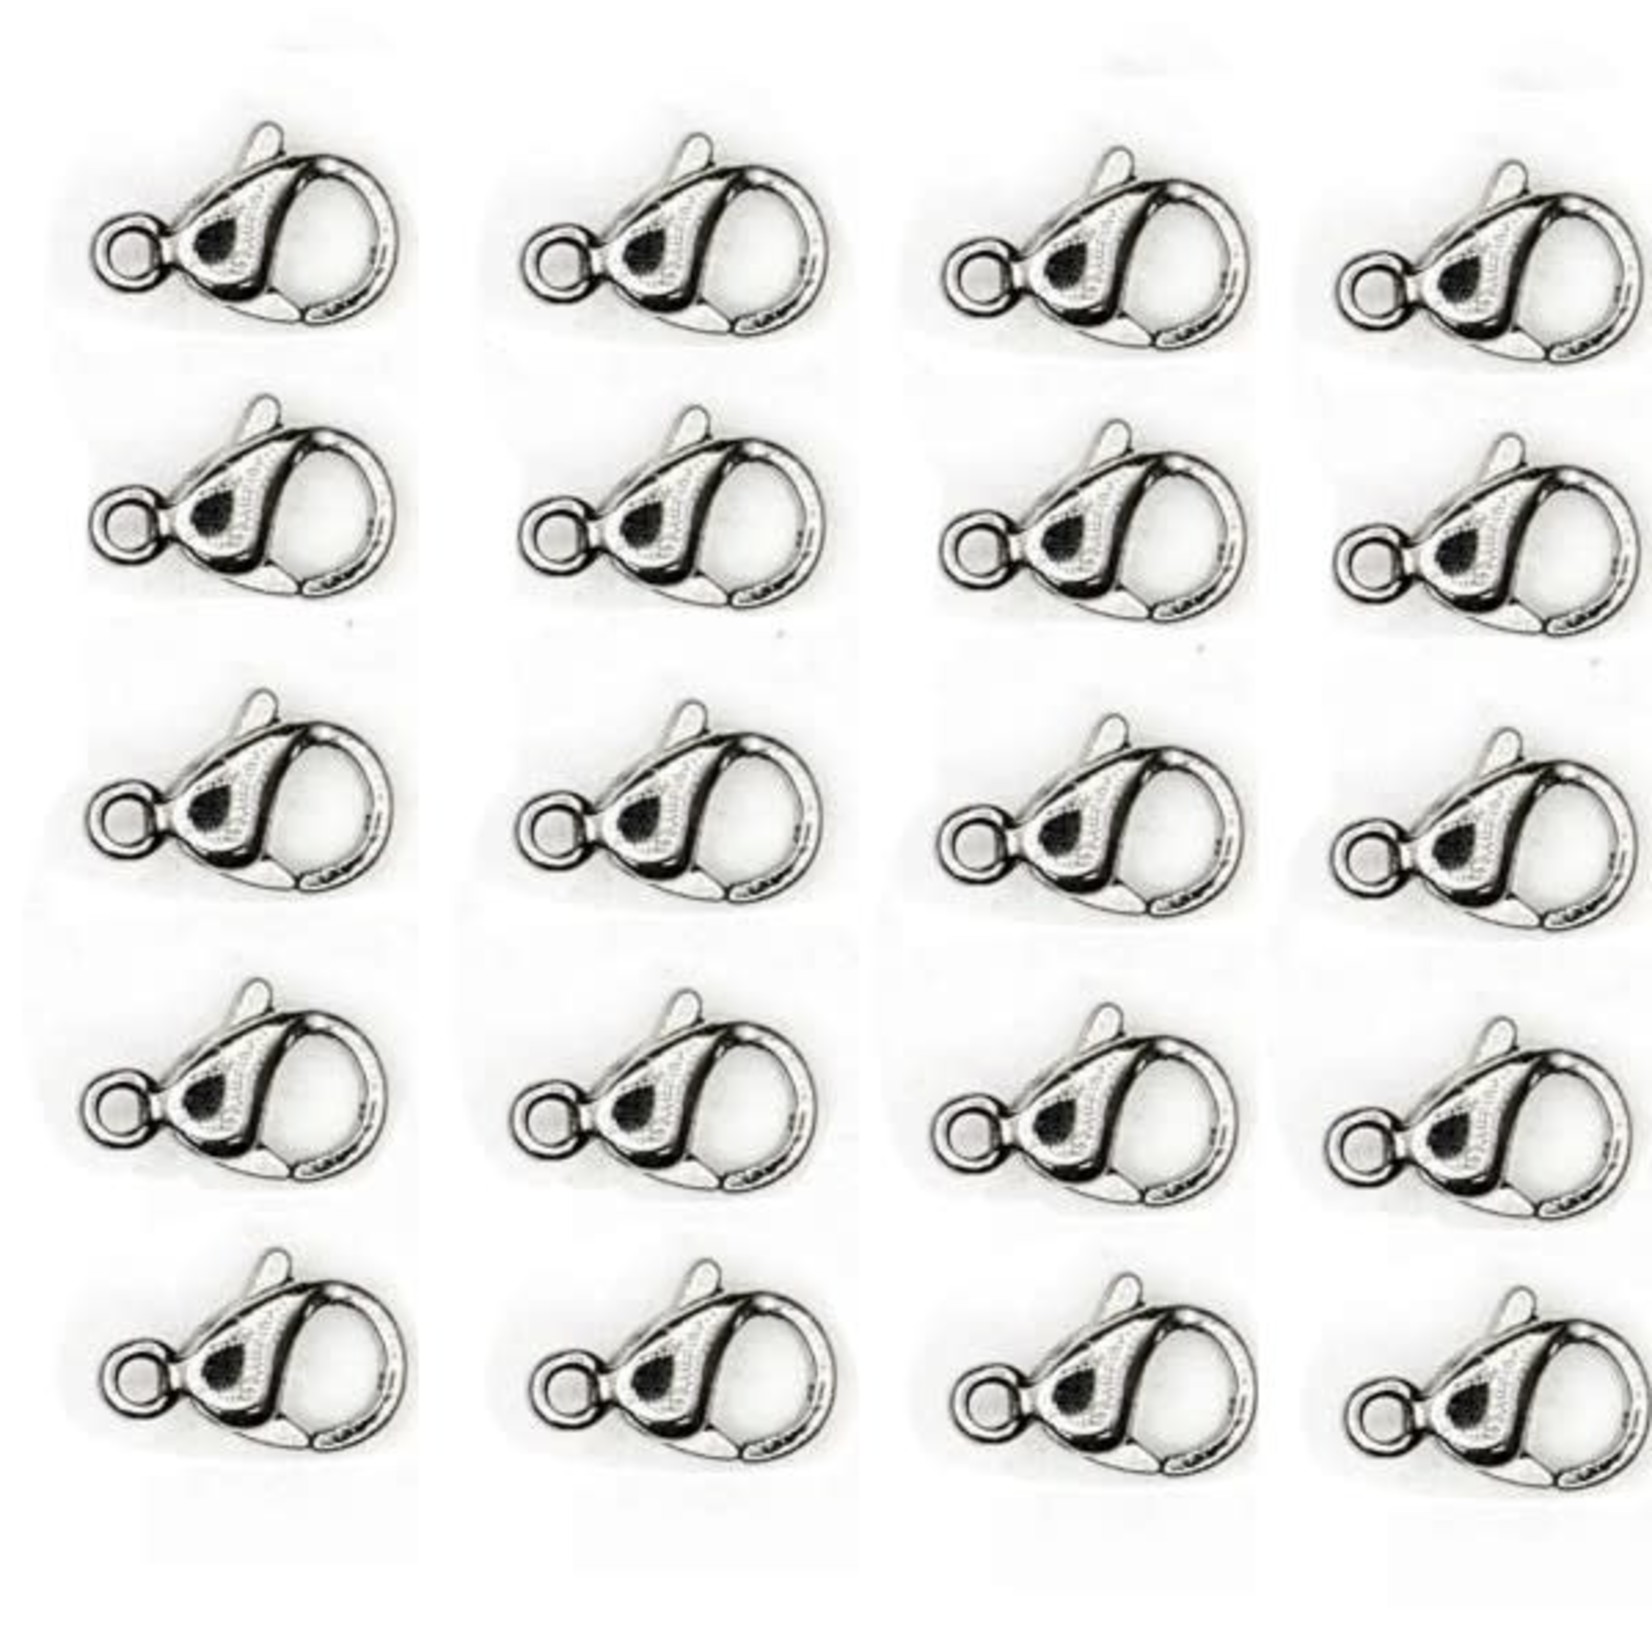 Stainless Steel Lobster Clasp 12x7mm Nickel-Free - 20 pieces